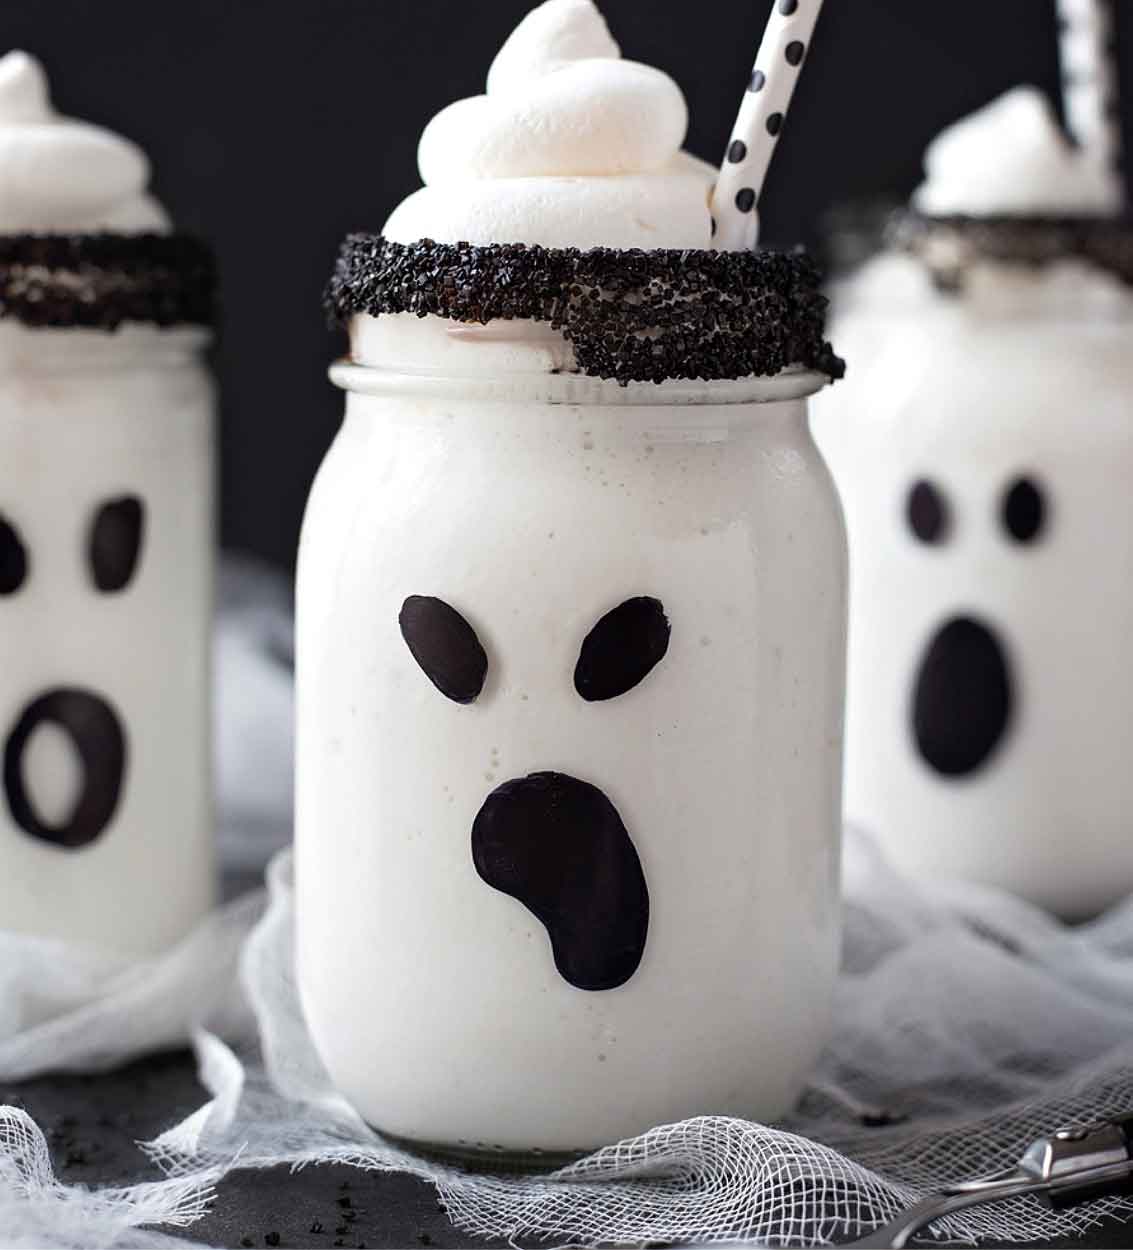 THE 10 MOST SPOOKTACULARLY CHIC HALLOWEEN IDEAS ON PINTEREST RIGHT NOW!